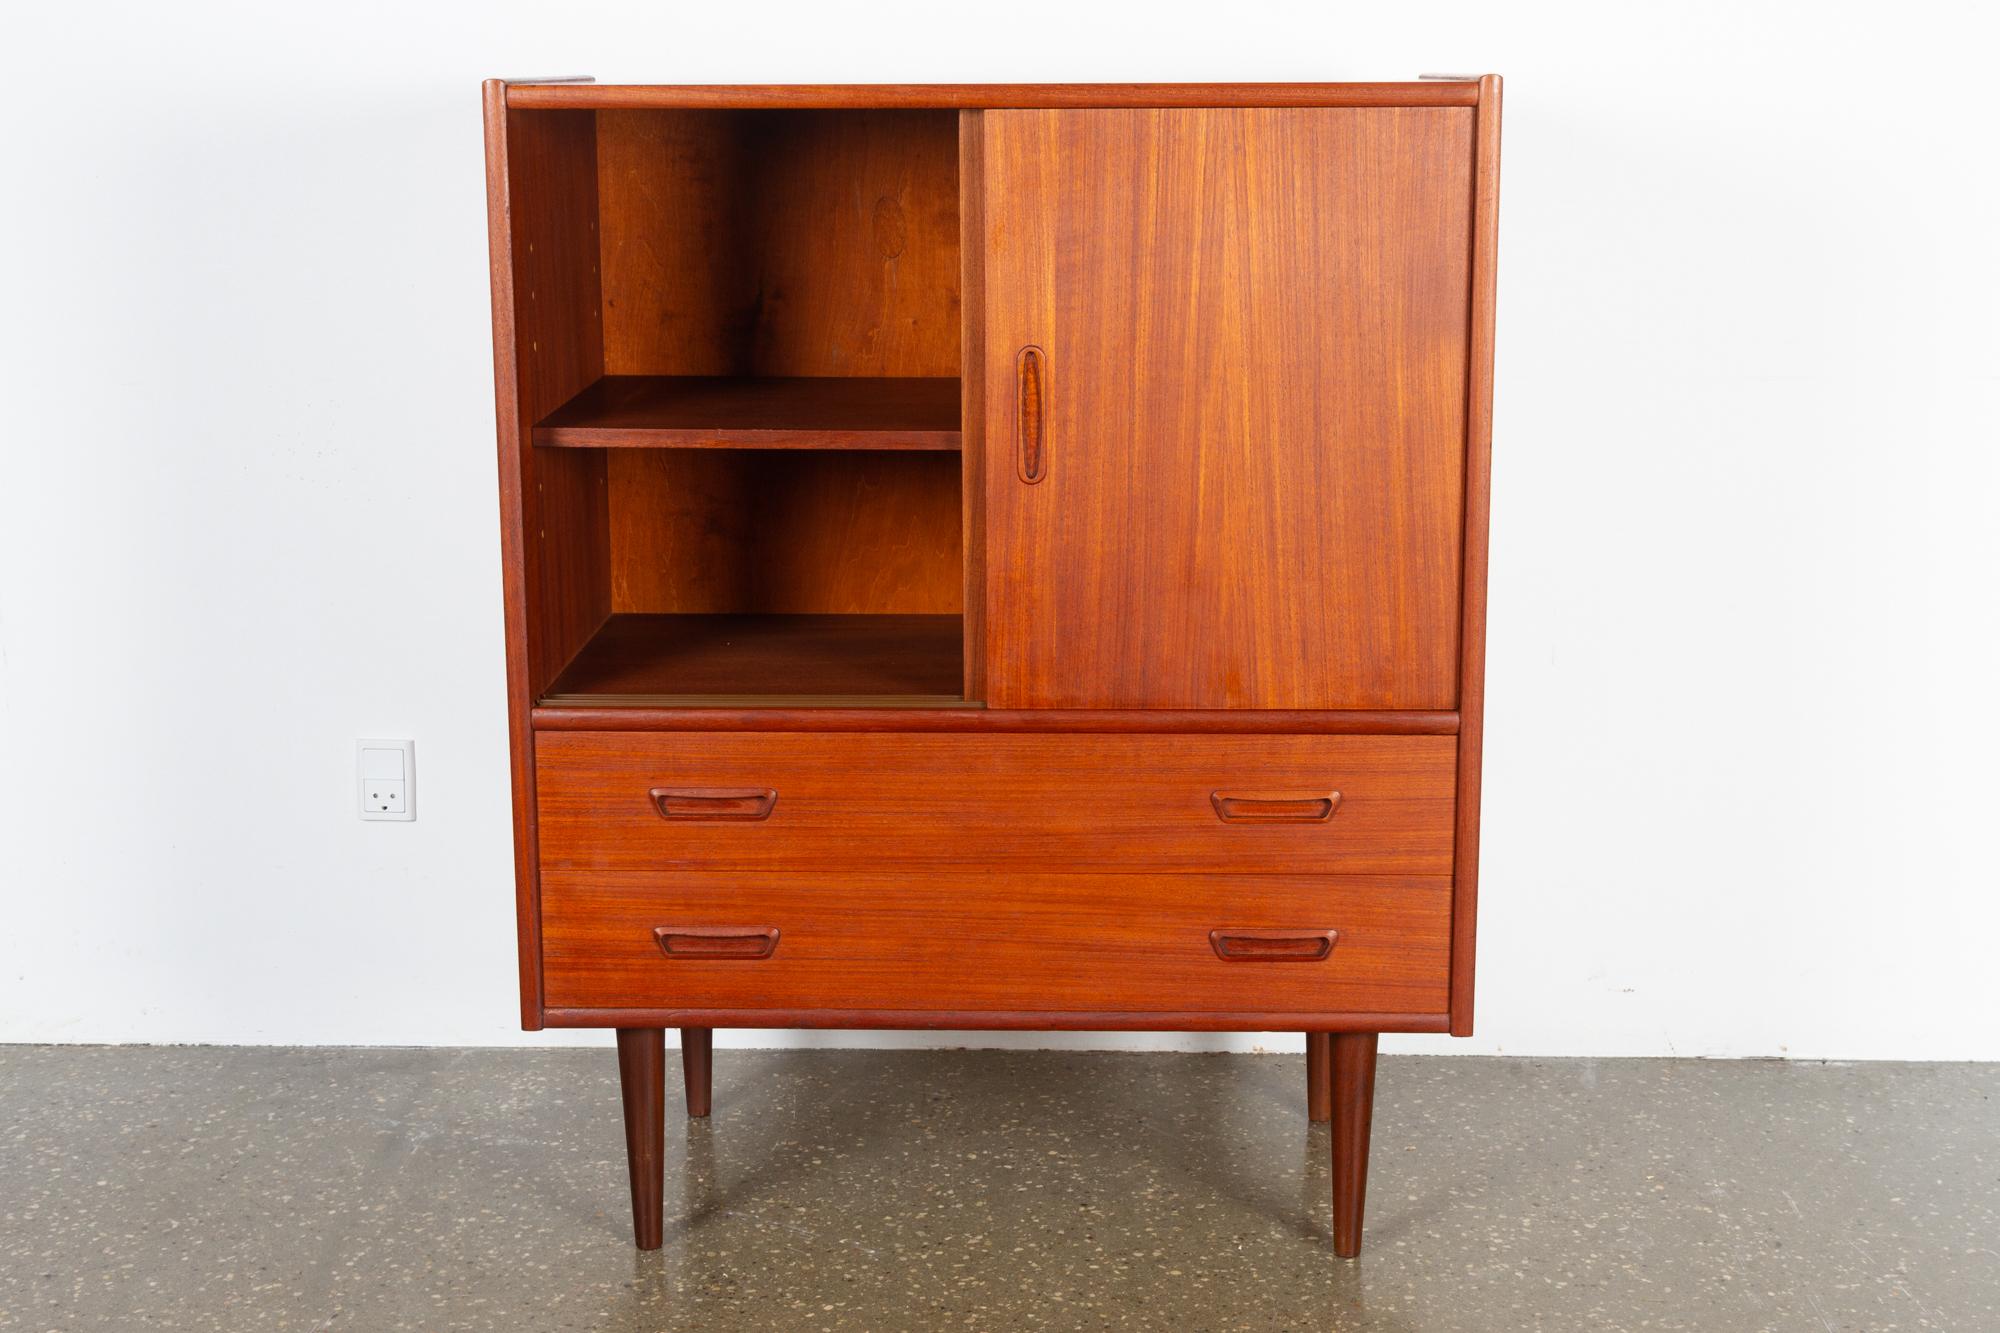 Vintage Danish teak cabinet P. Westergaards Møbelfabrik, 1960s
Elegant Mid-Century Modern teak cabinet with double sliding doors and two wide drawers. Large compartment with height adjustable shelf. Doors fitted with grips in solid teak. Round